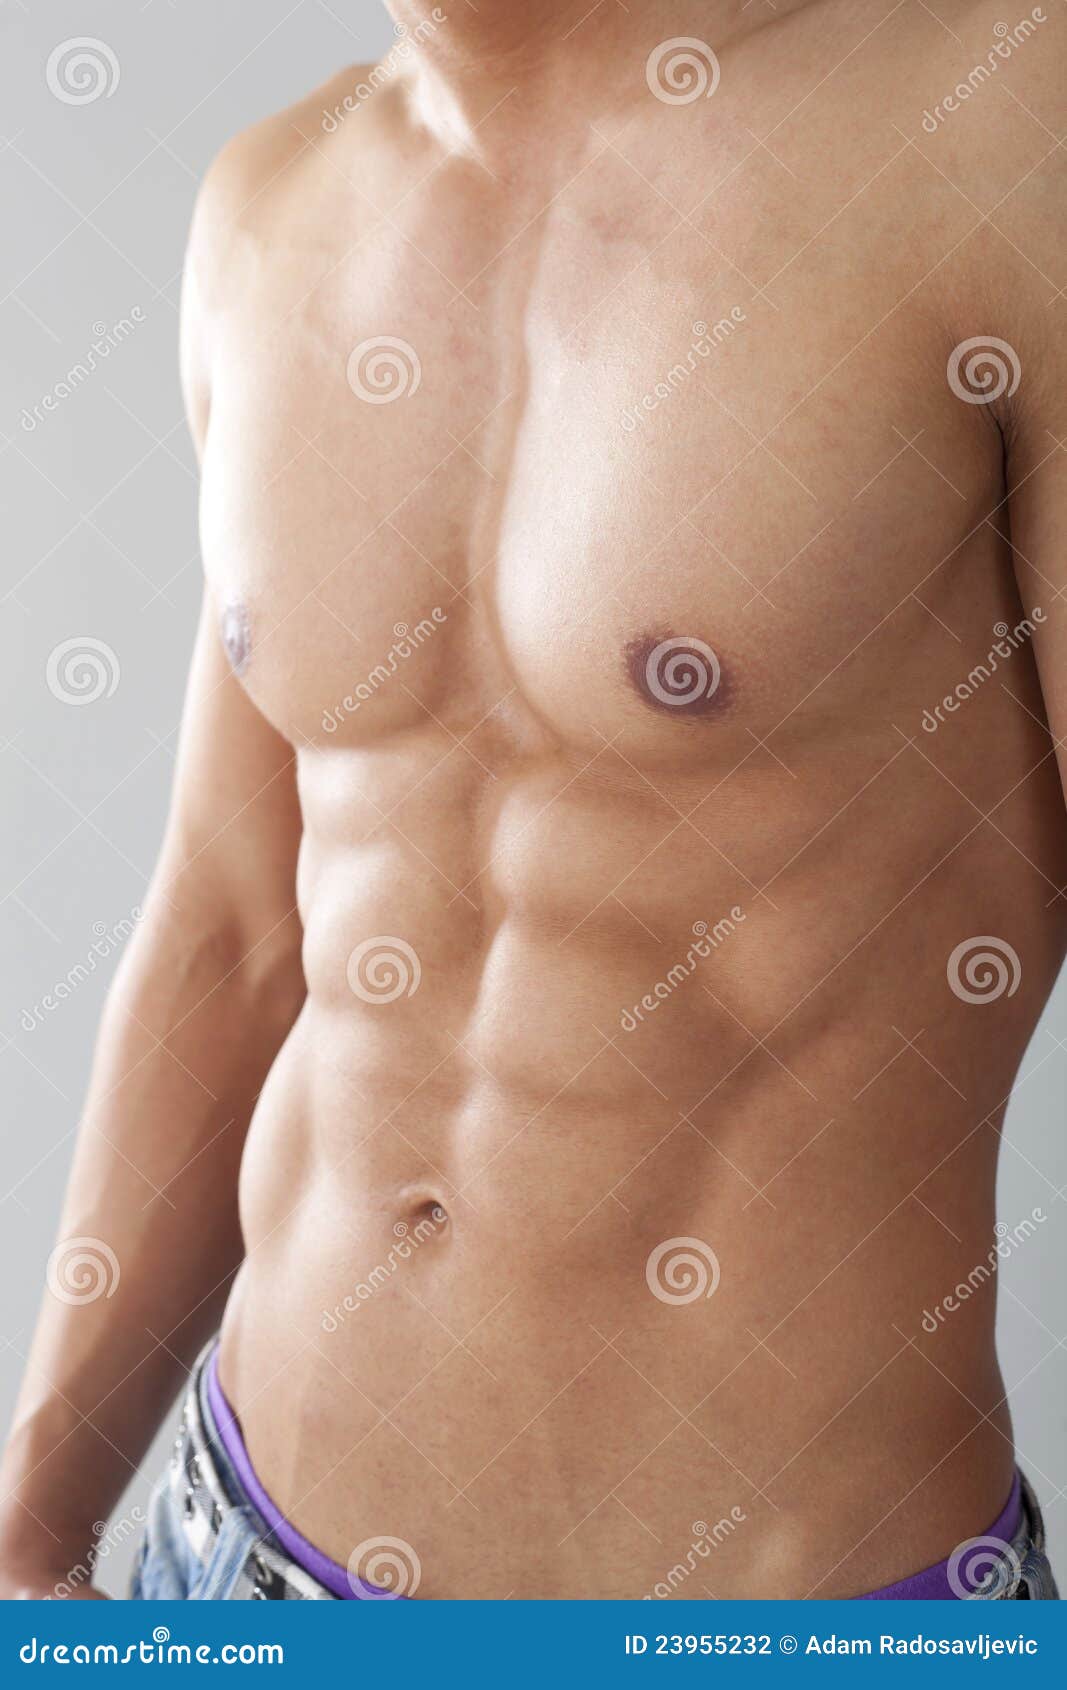 Male Chest And Muscles Stock Photography - Image: 23955232